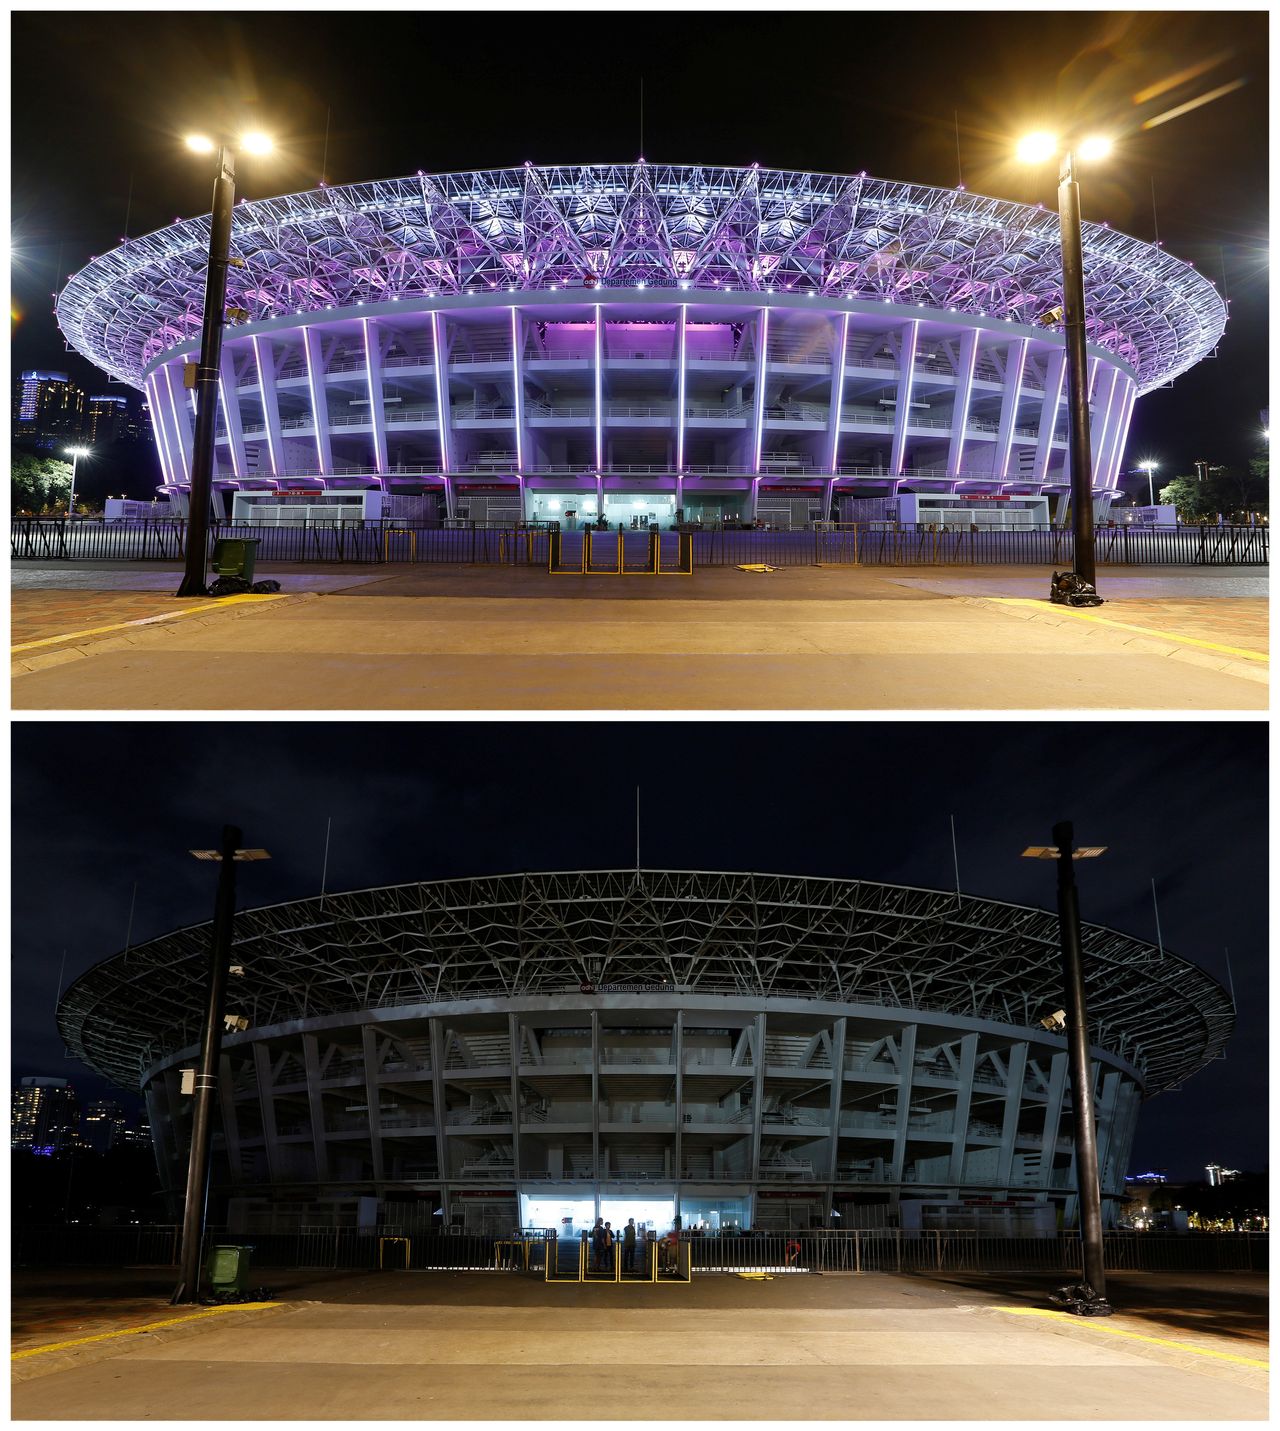 Gelora Bung Karno Stadium, before and after its lights were dimmed.